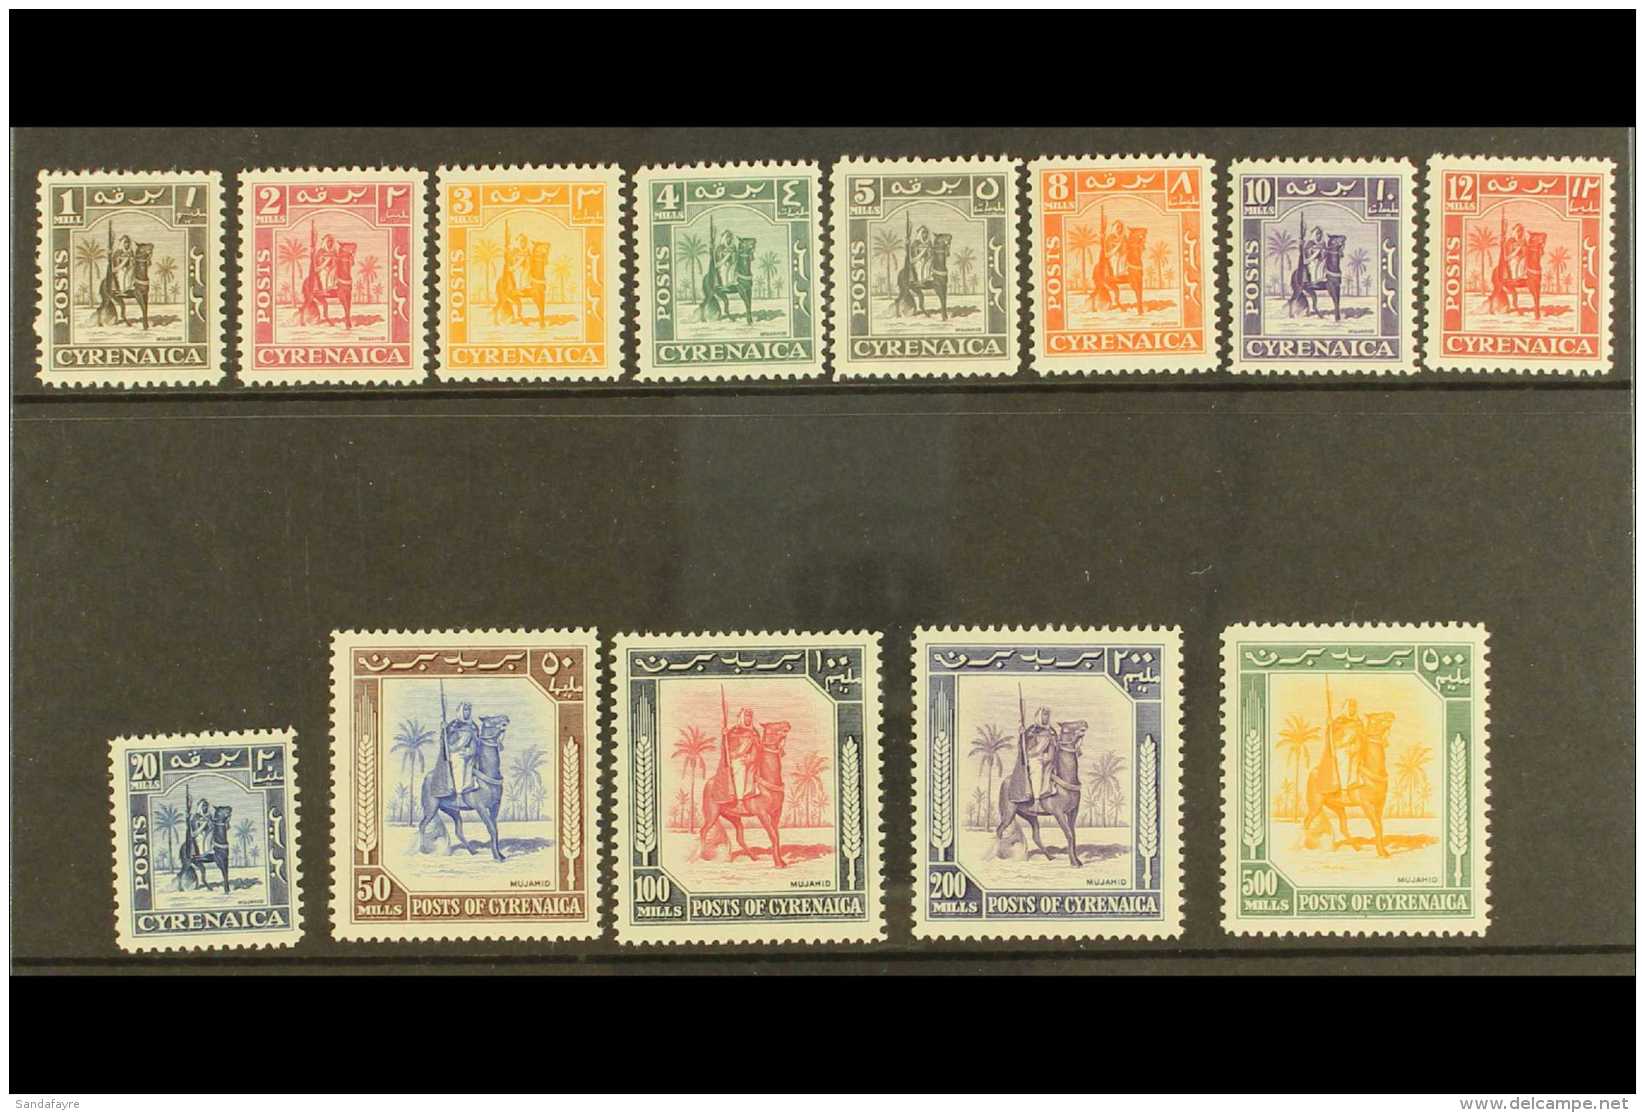 CYRENAICA 1950 Mounted Warrior Complete Set, SG 136/48, Very Fine Never Hinged Mint, Fresh. (13 Stamps) For More... - Afrique Orientale Italienne